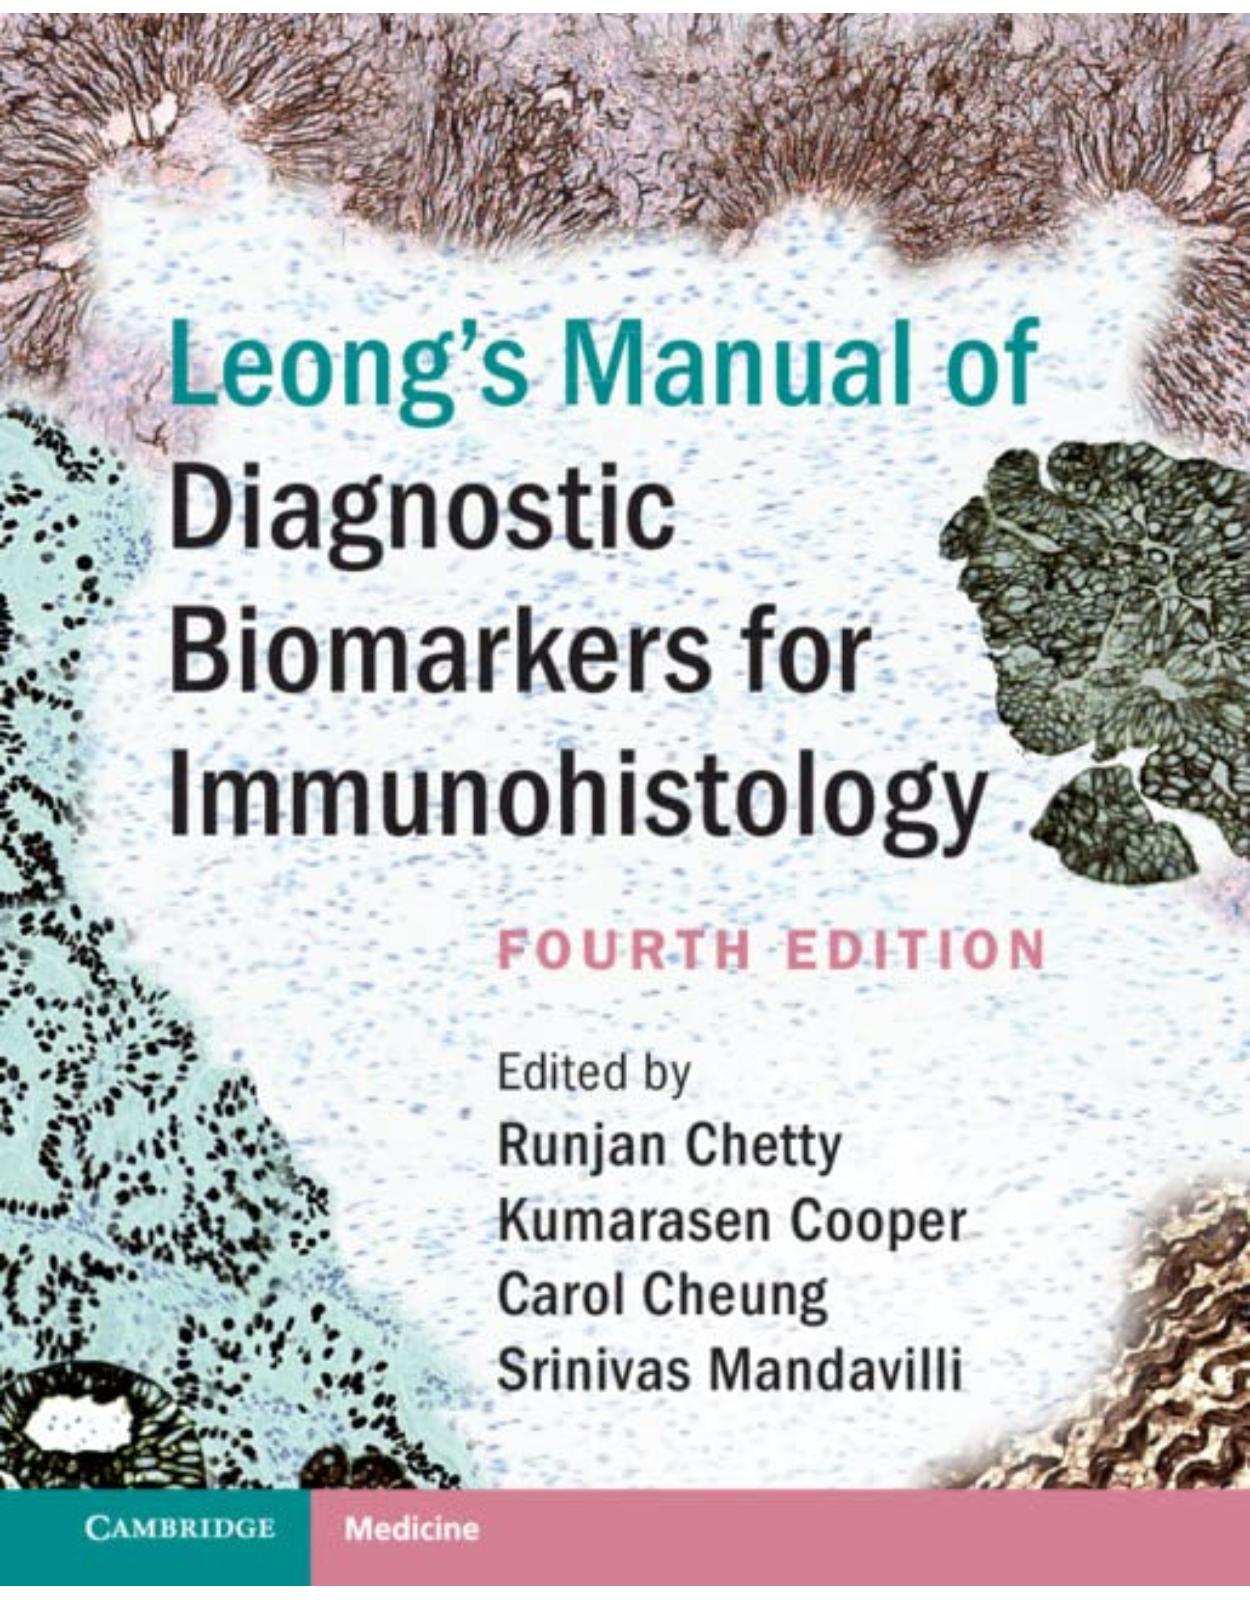 Leong’s Manual of Diagnostic Biomarkers for Immunohistology